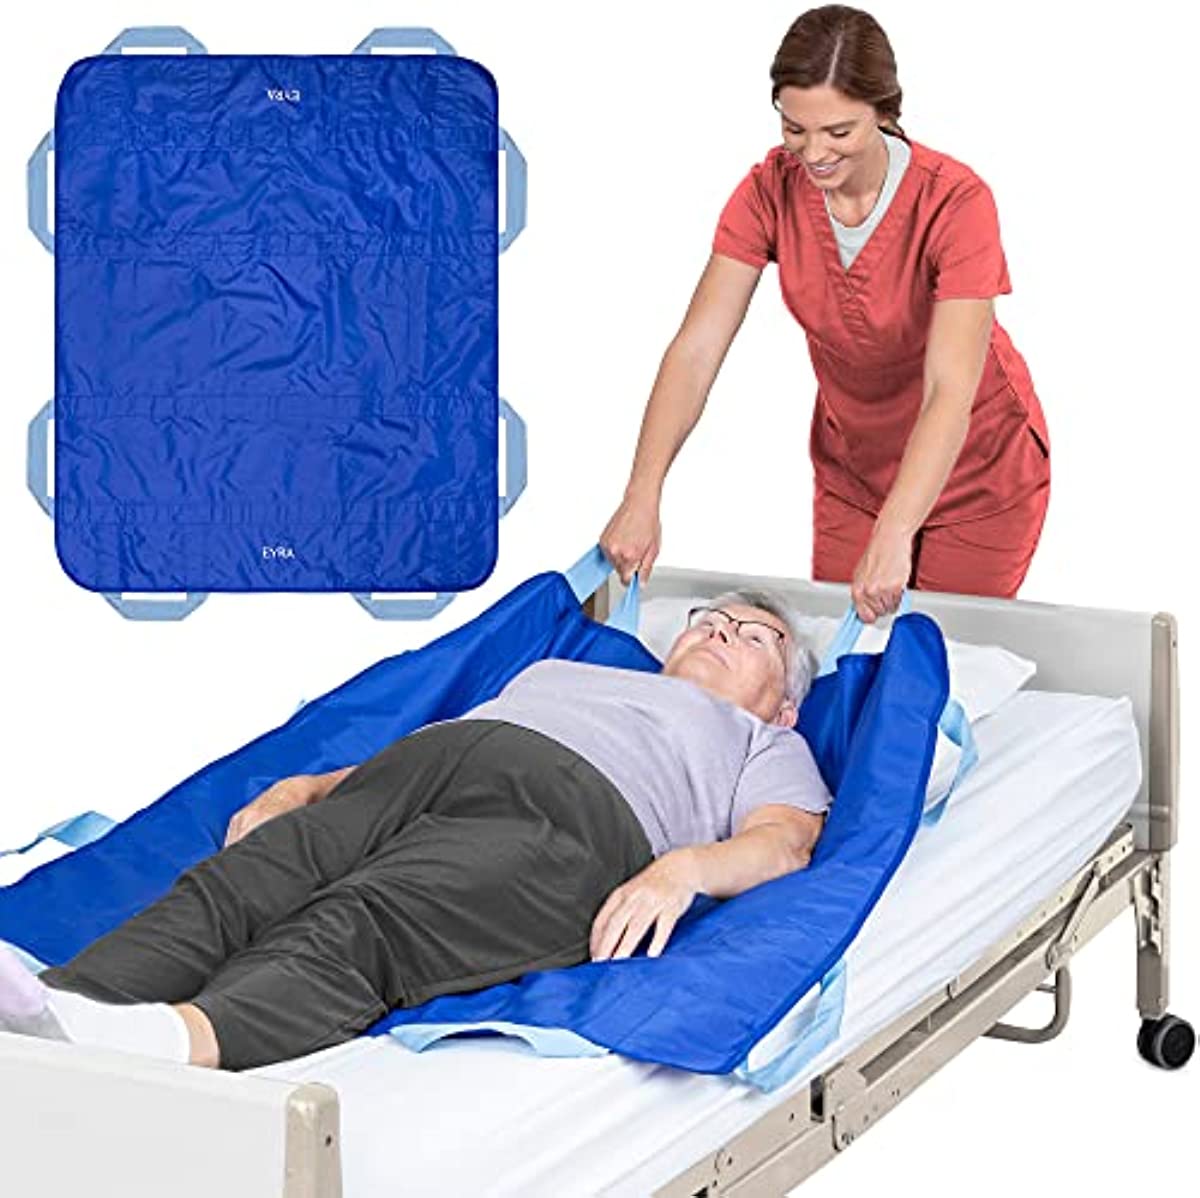 Positioning Bed Pad with Handles - 48\" x 40” Slide Sheet for Moving Patients - Fit for Repositioning One Person - Draw Sheets for Hospital Beds and Patient Transfer - Elderly Home Care, Washable